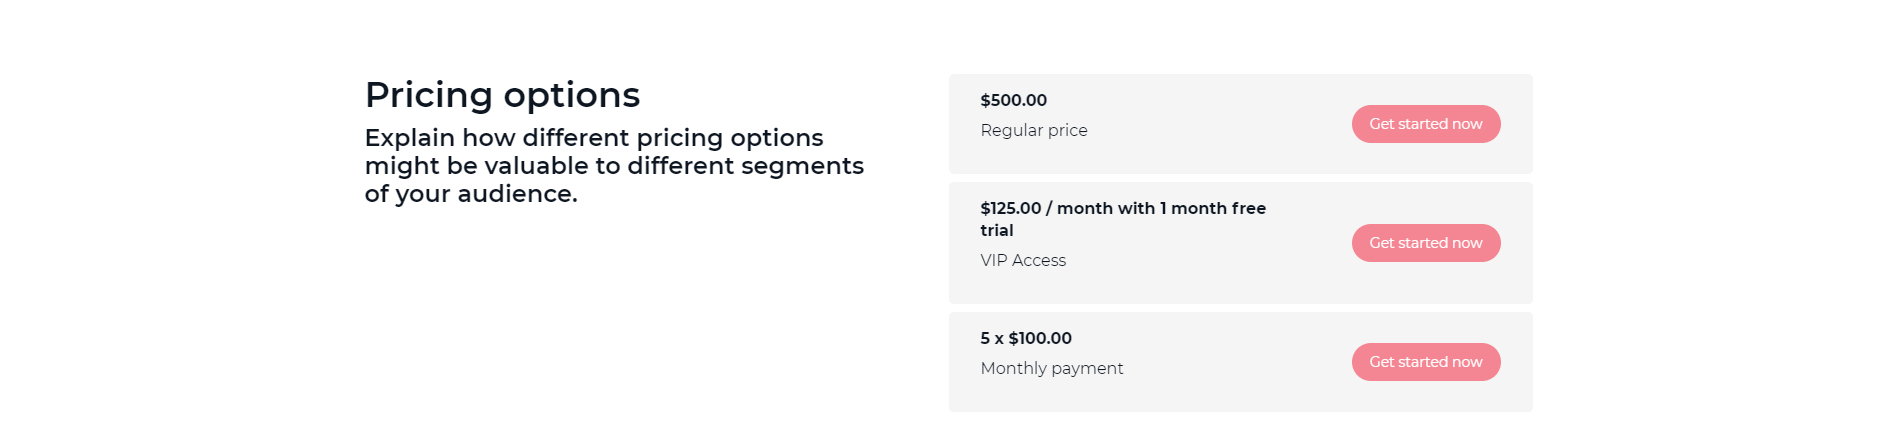 pricing_options_-_empire_spark.png